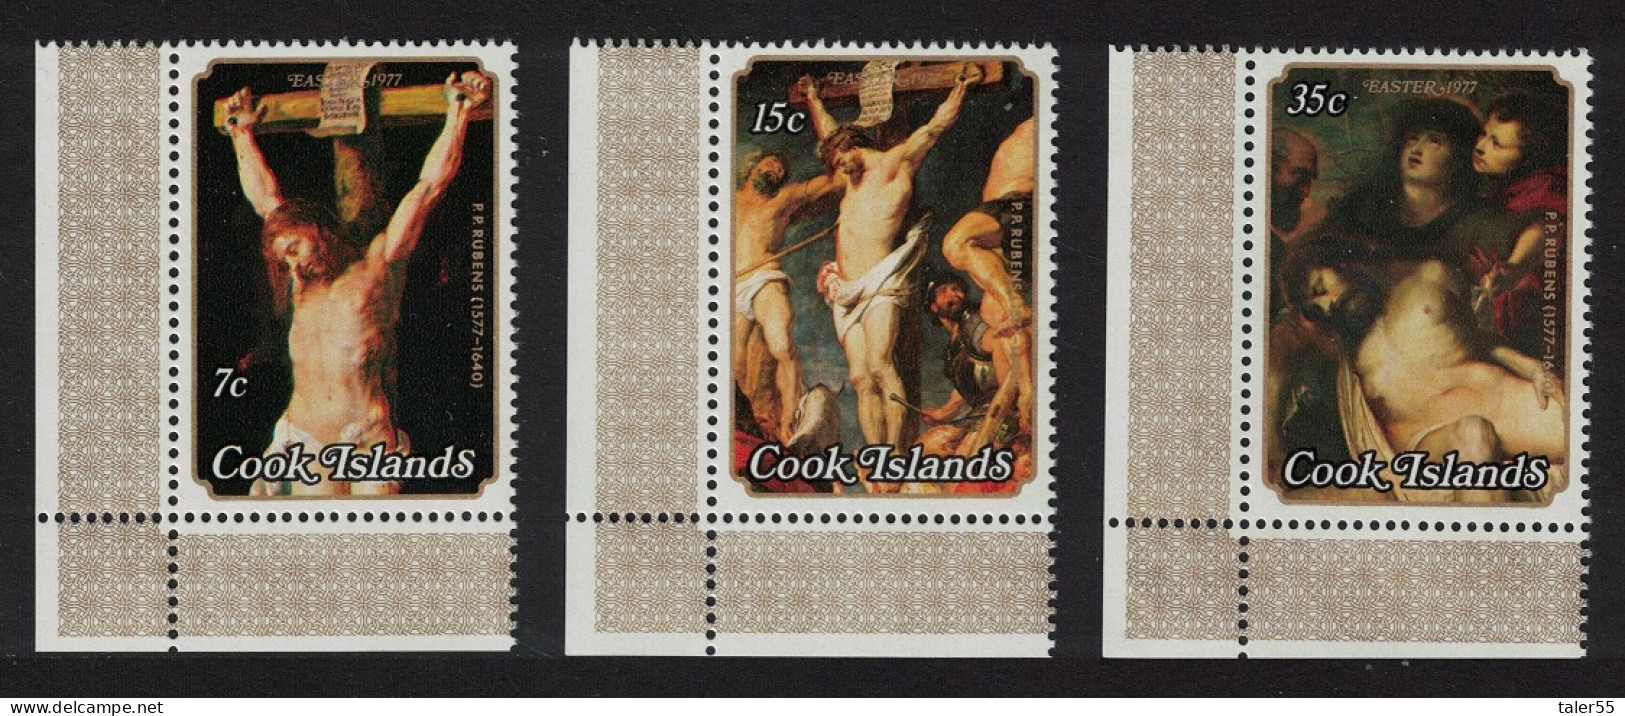 Cook Is. Easter 400th Birth Anniversary Of Rubens 3v Corners 1977 MNH SG#571-573 - Islas Cook